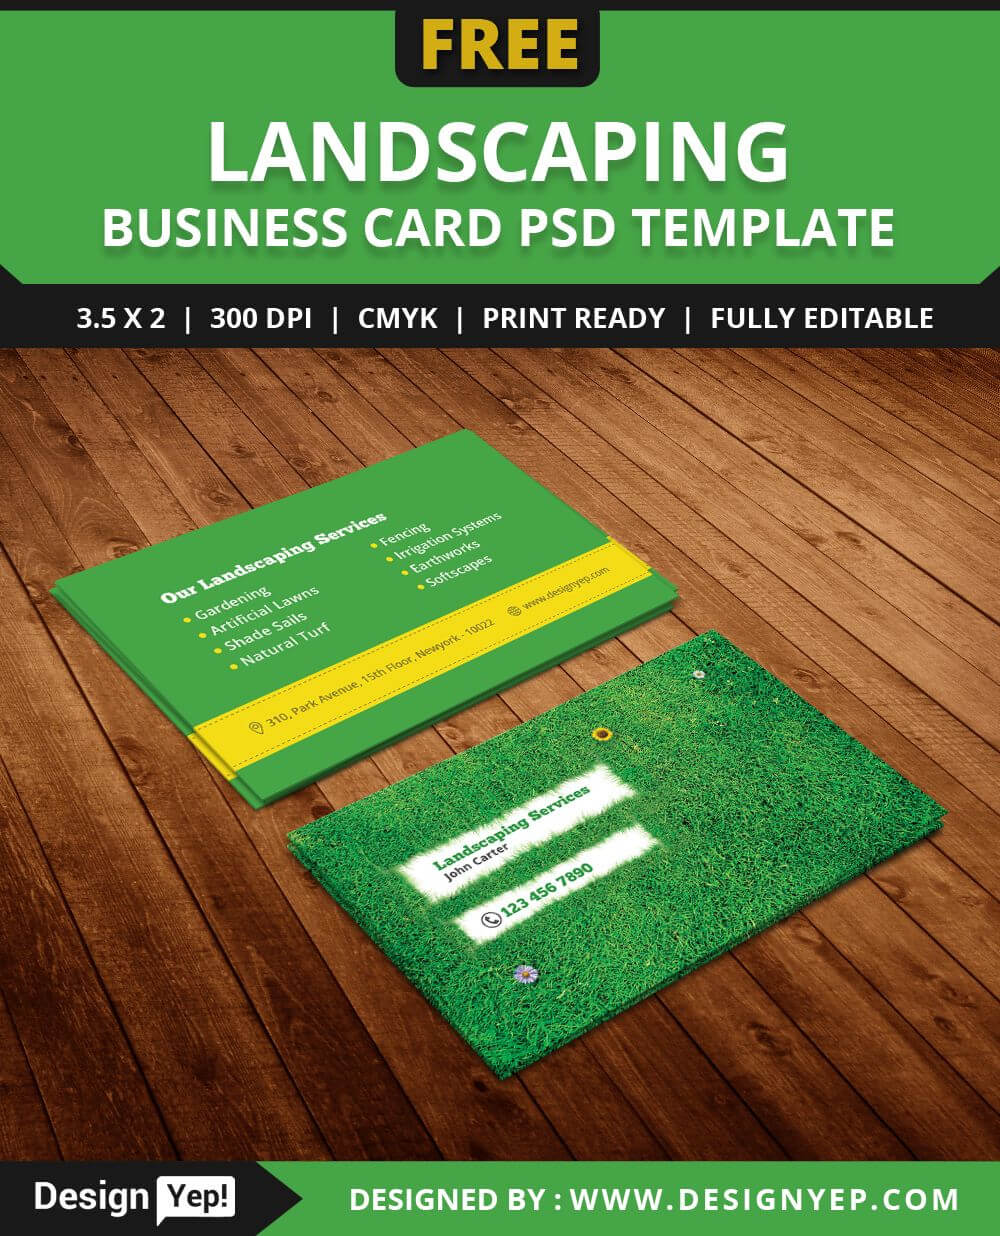 Free Landscaping Business Card Template Psd | Free Business With Landscaping Business Card Template